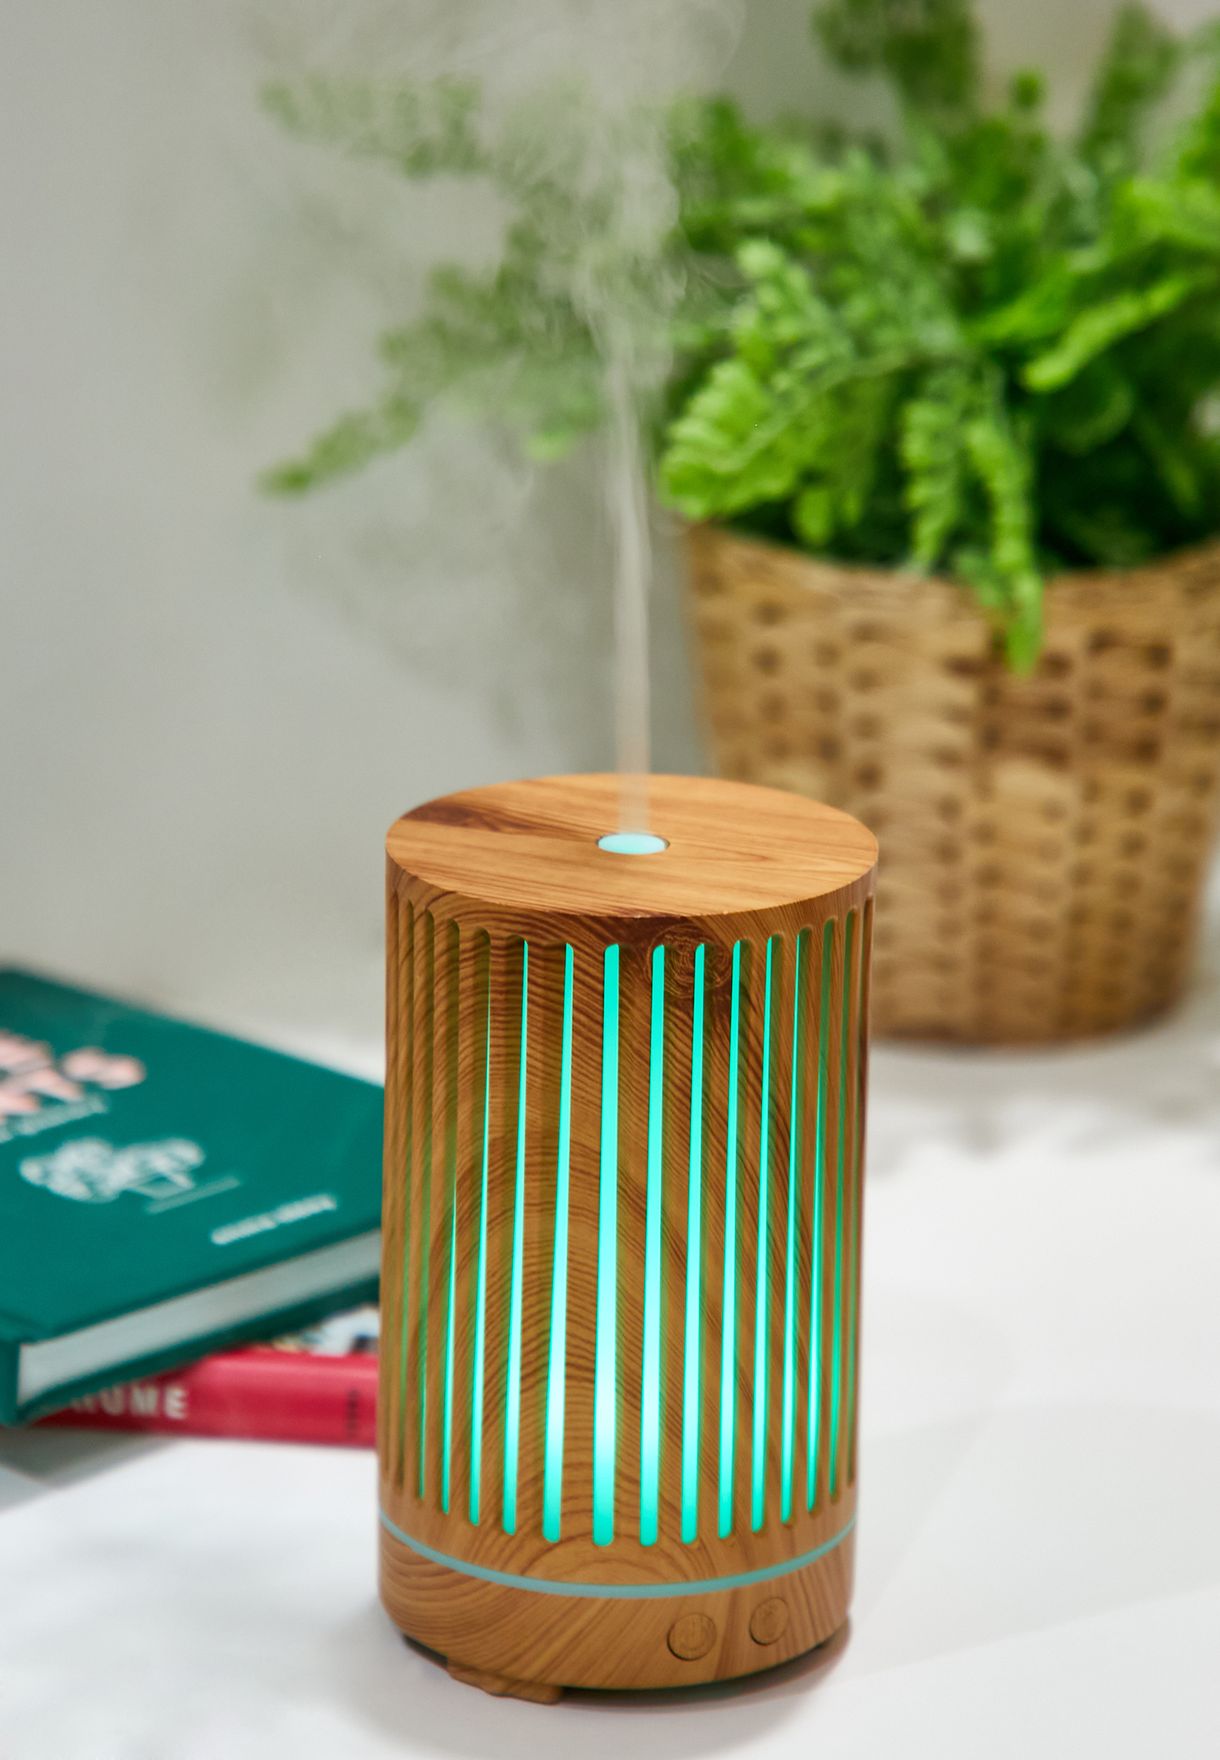 Tranquility Ultrasonic Electronic Aroma Diffuser